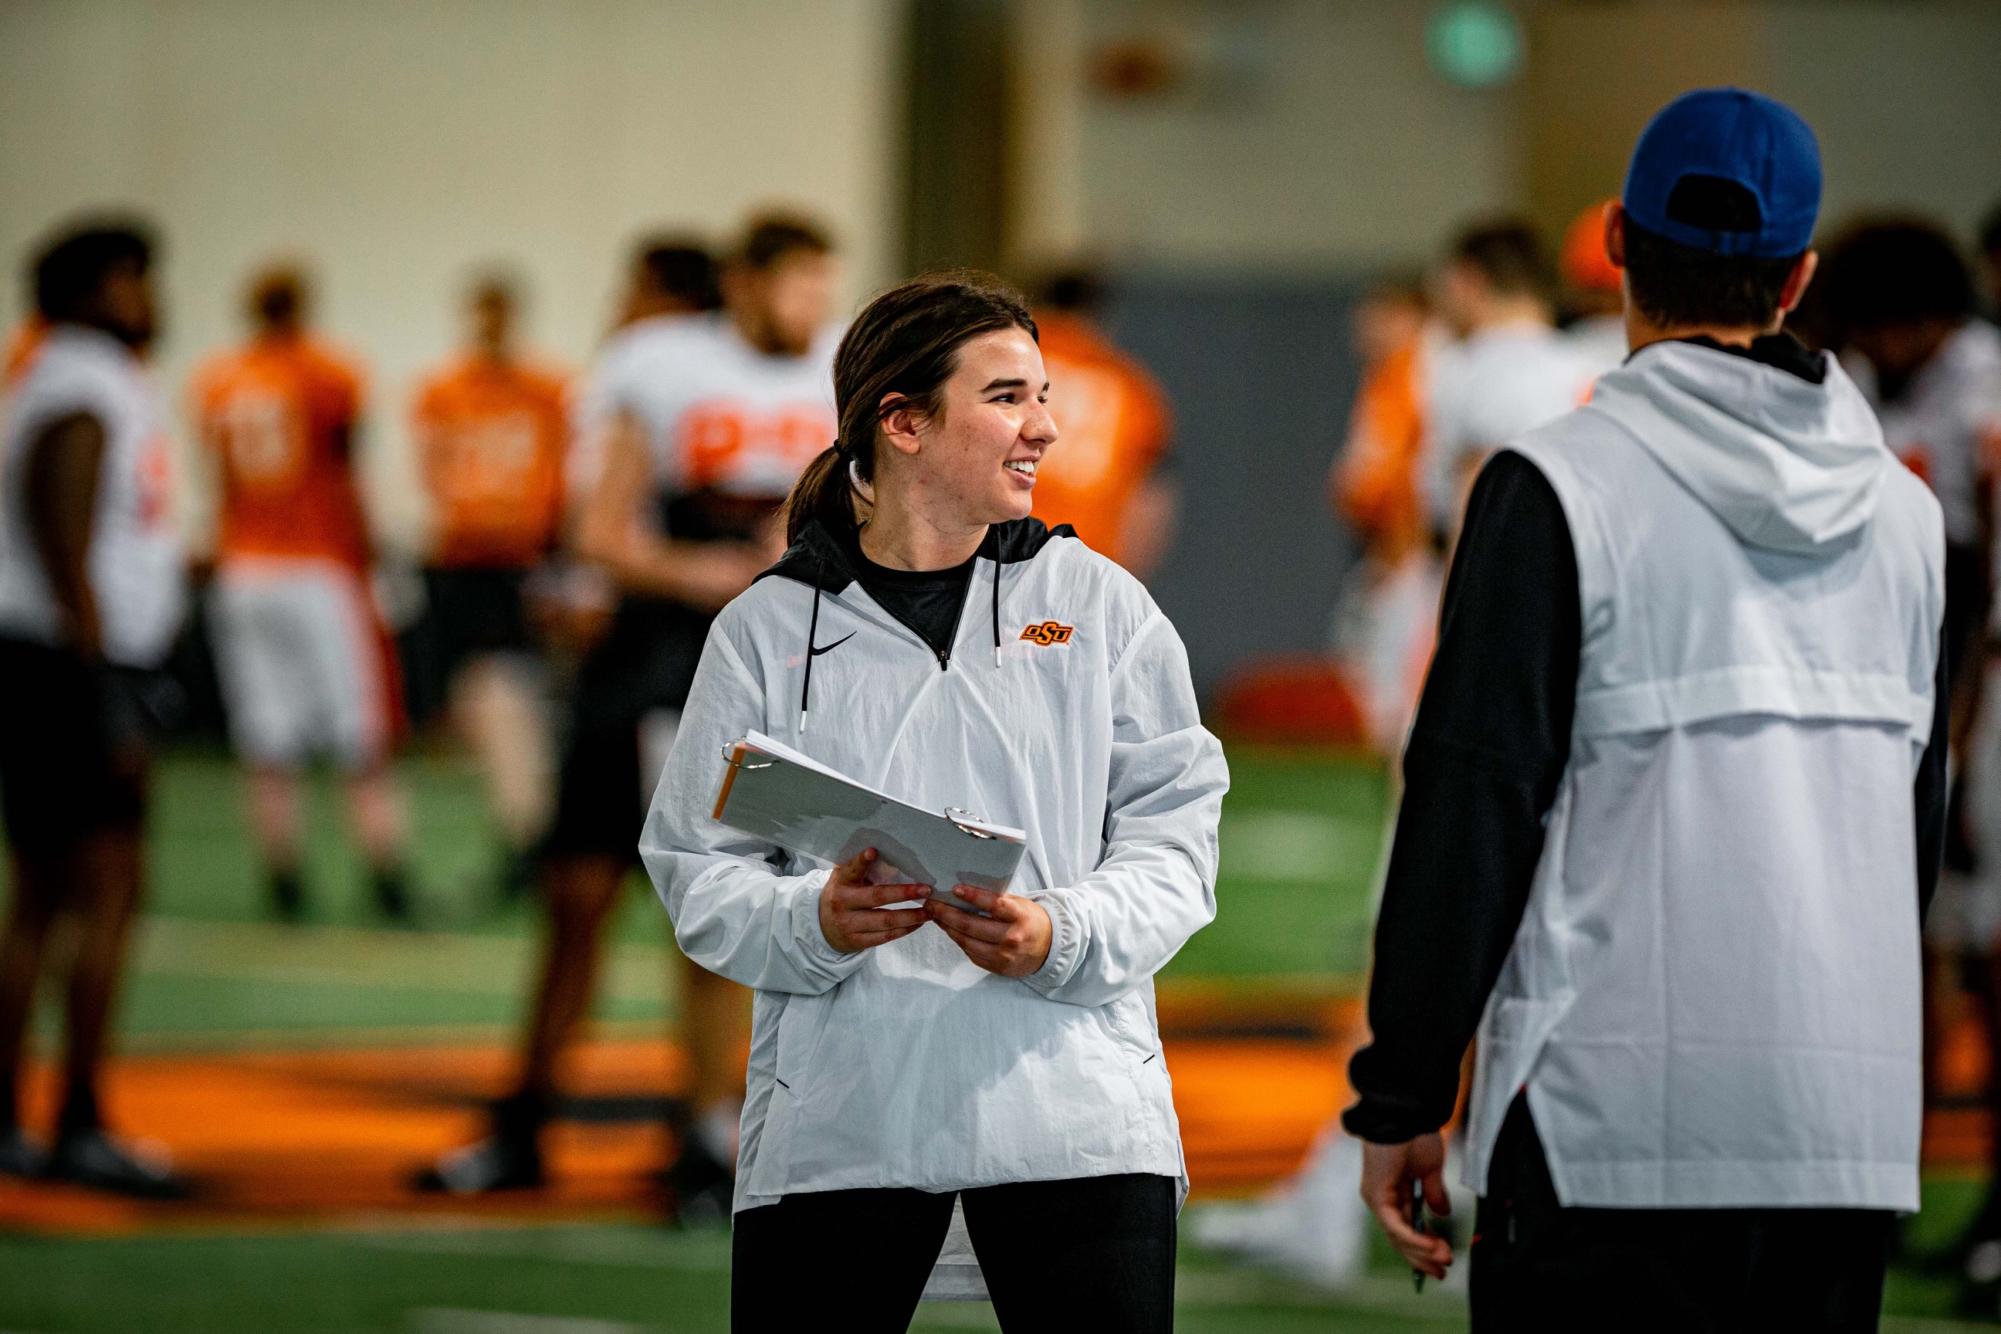 Isabel Diaz coaches the scout team wide receivers at Oklahoma State University this past fall. She graduated from OSU this May.